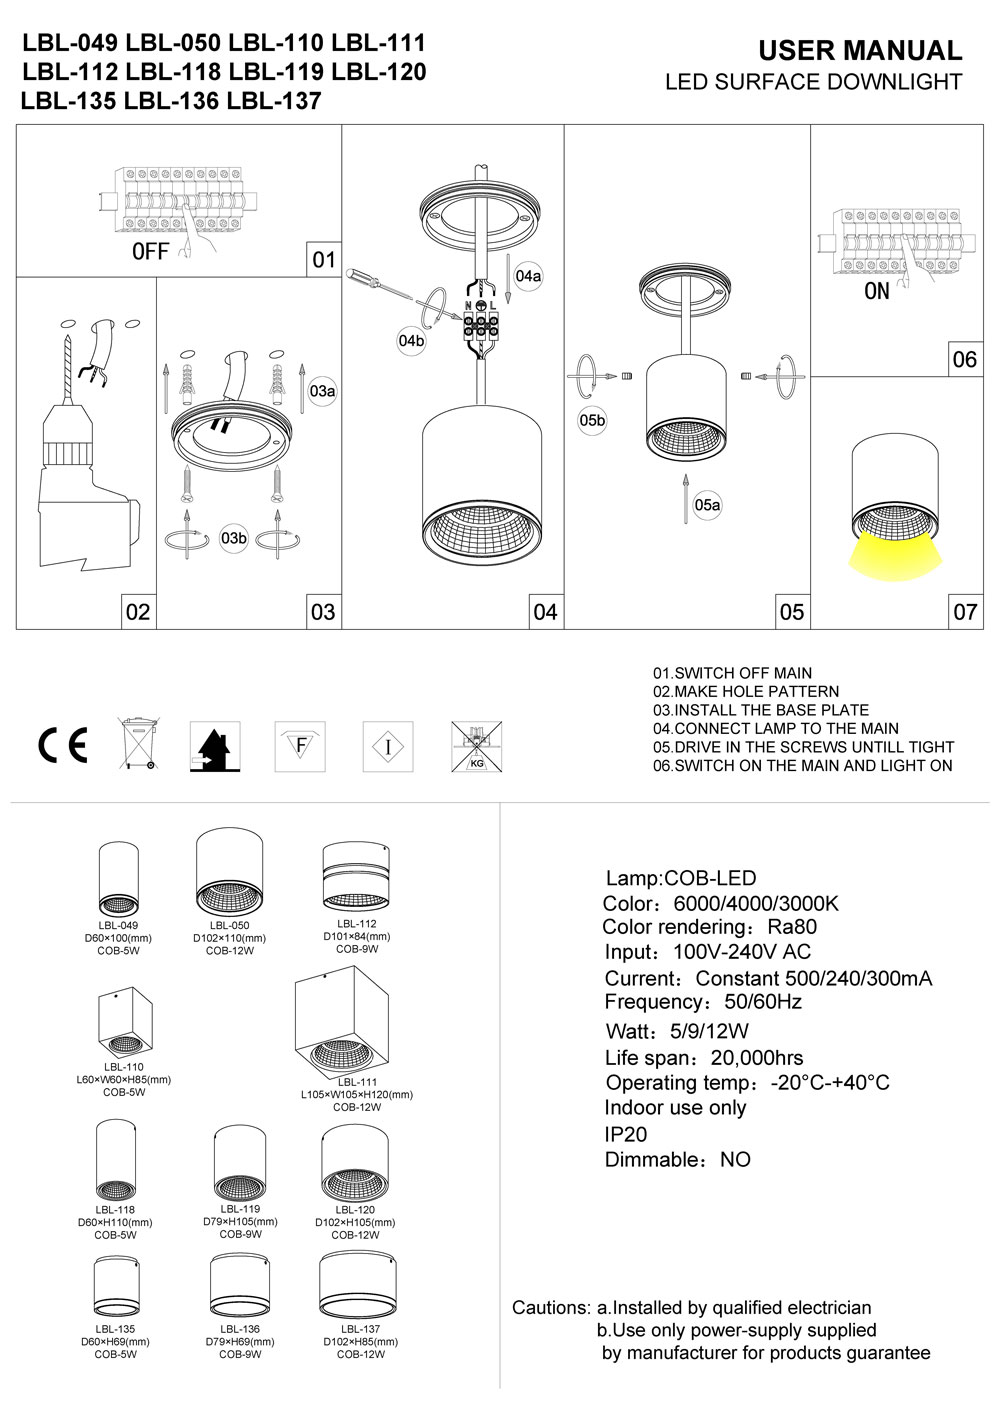 LBL136 surface mounted LED downlight installation guide